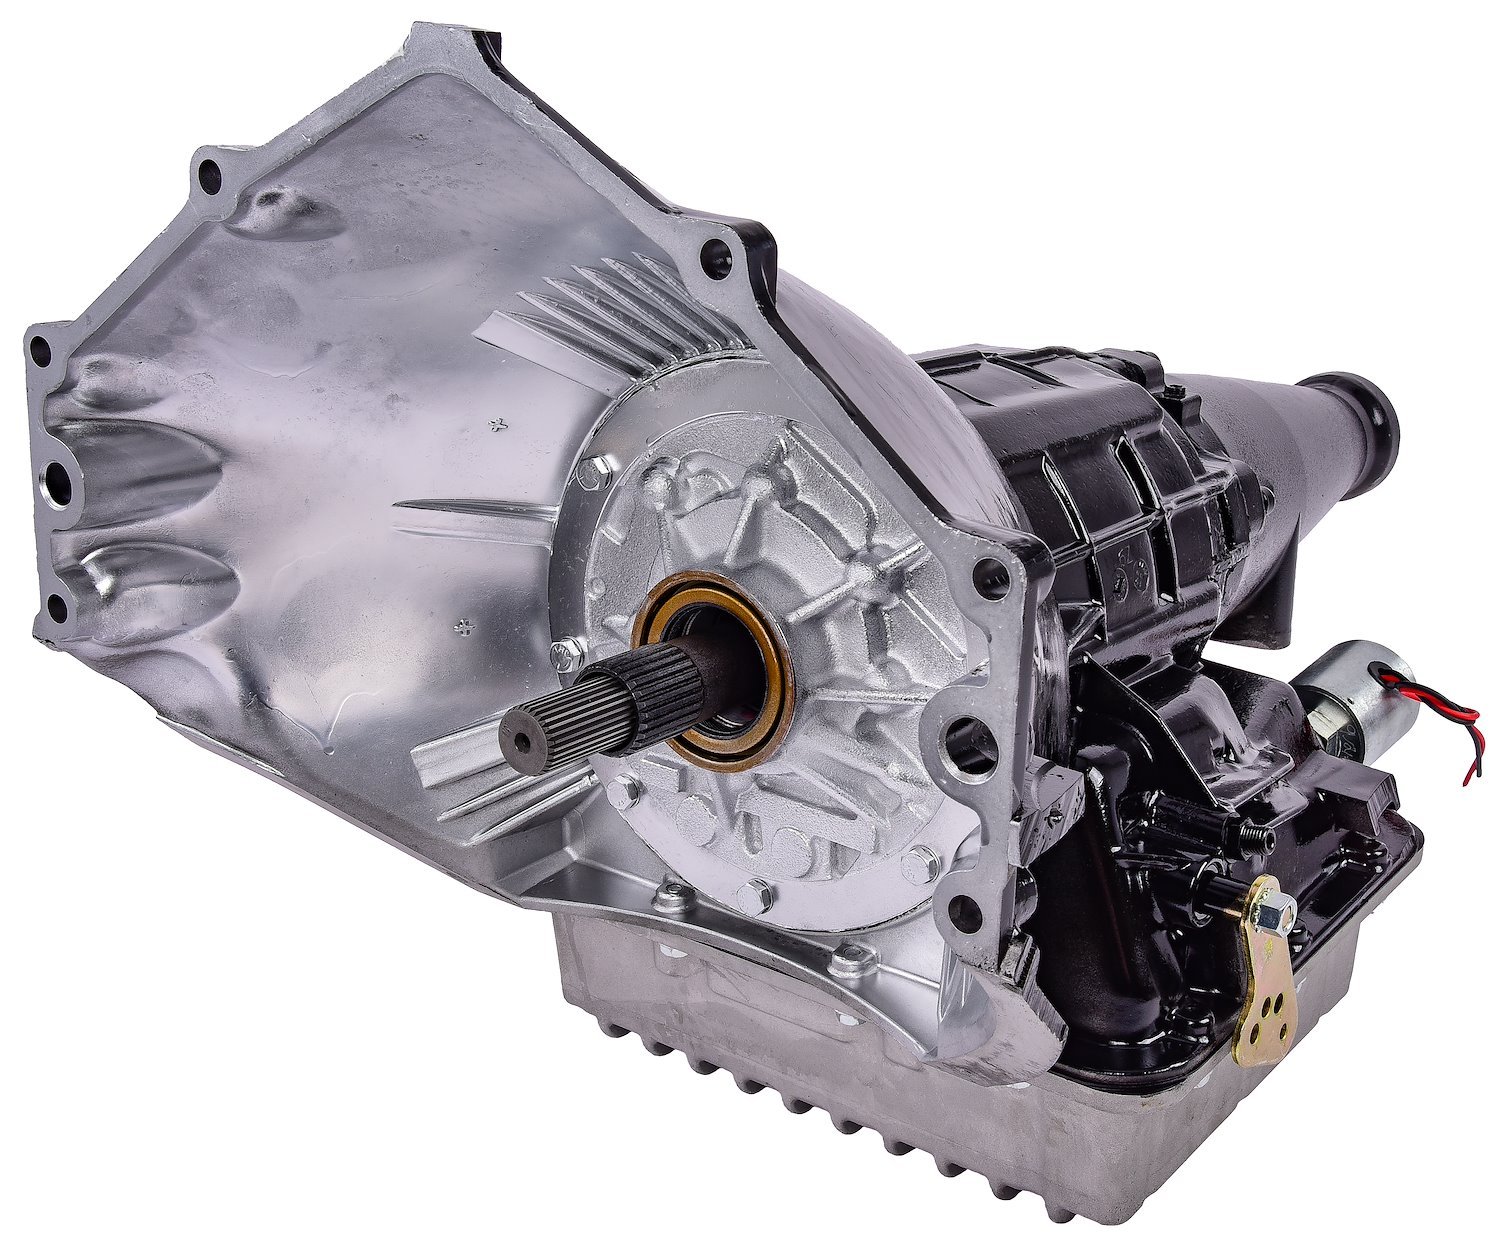 Race Prepped GM Powerglide Transmission, Full-Length [Rated Up To 1200 HP]